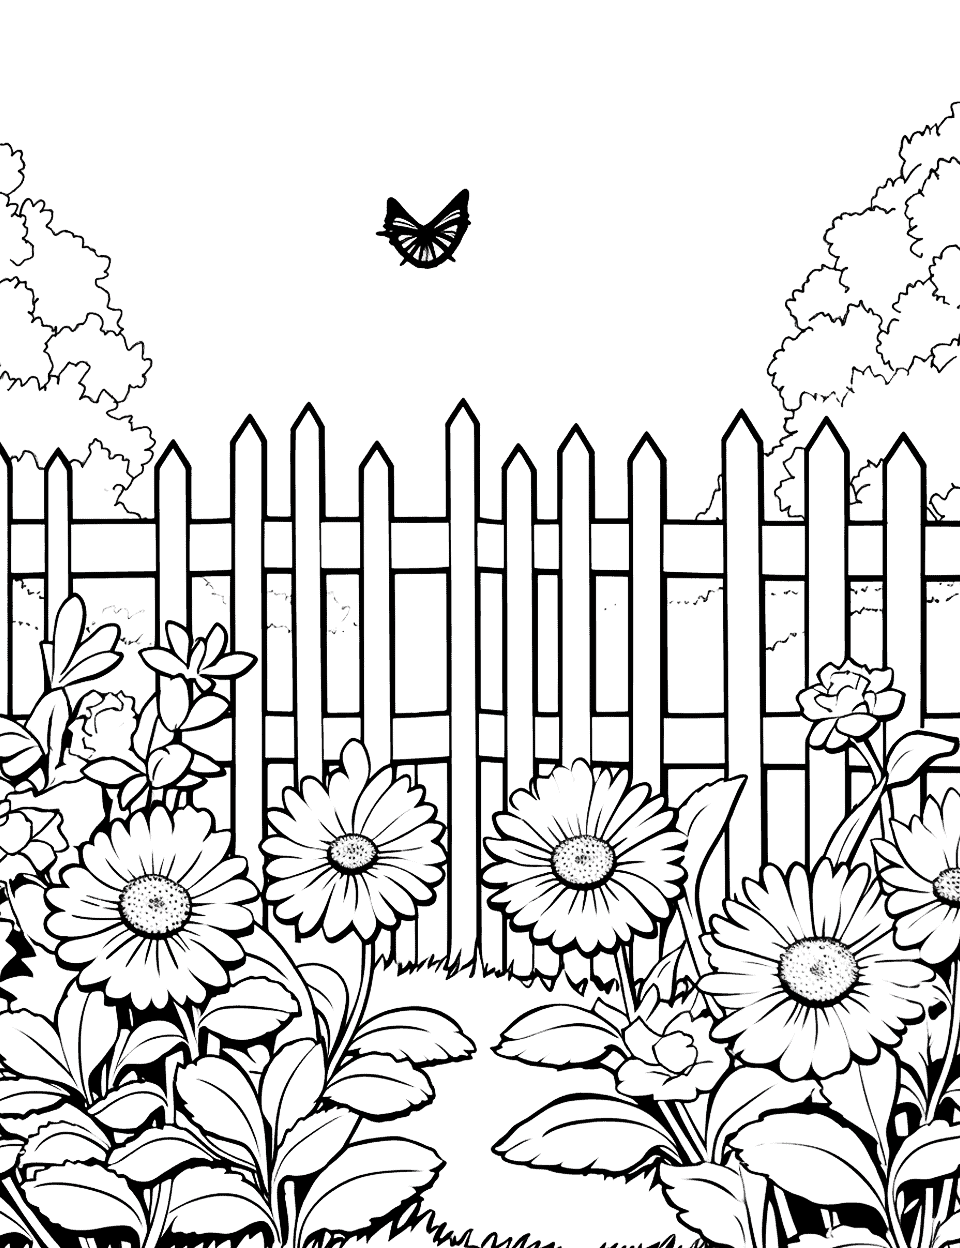 Detailed Garden Scene Summer Coloring Page - An intricate scene of a summer garden full of blooming flowers, butterflies, and trees.